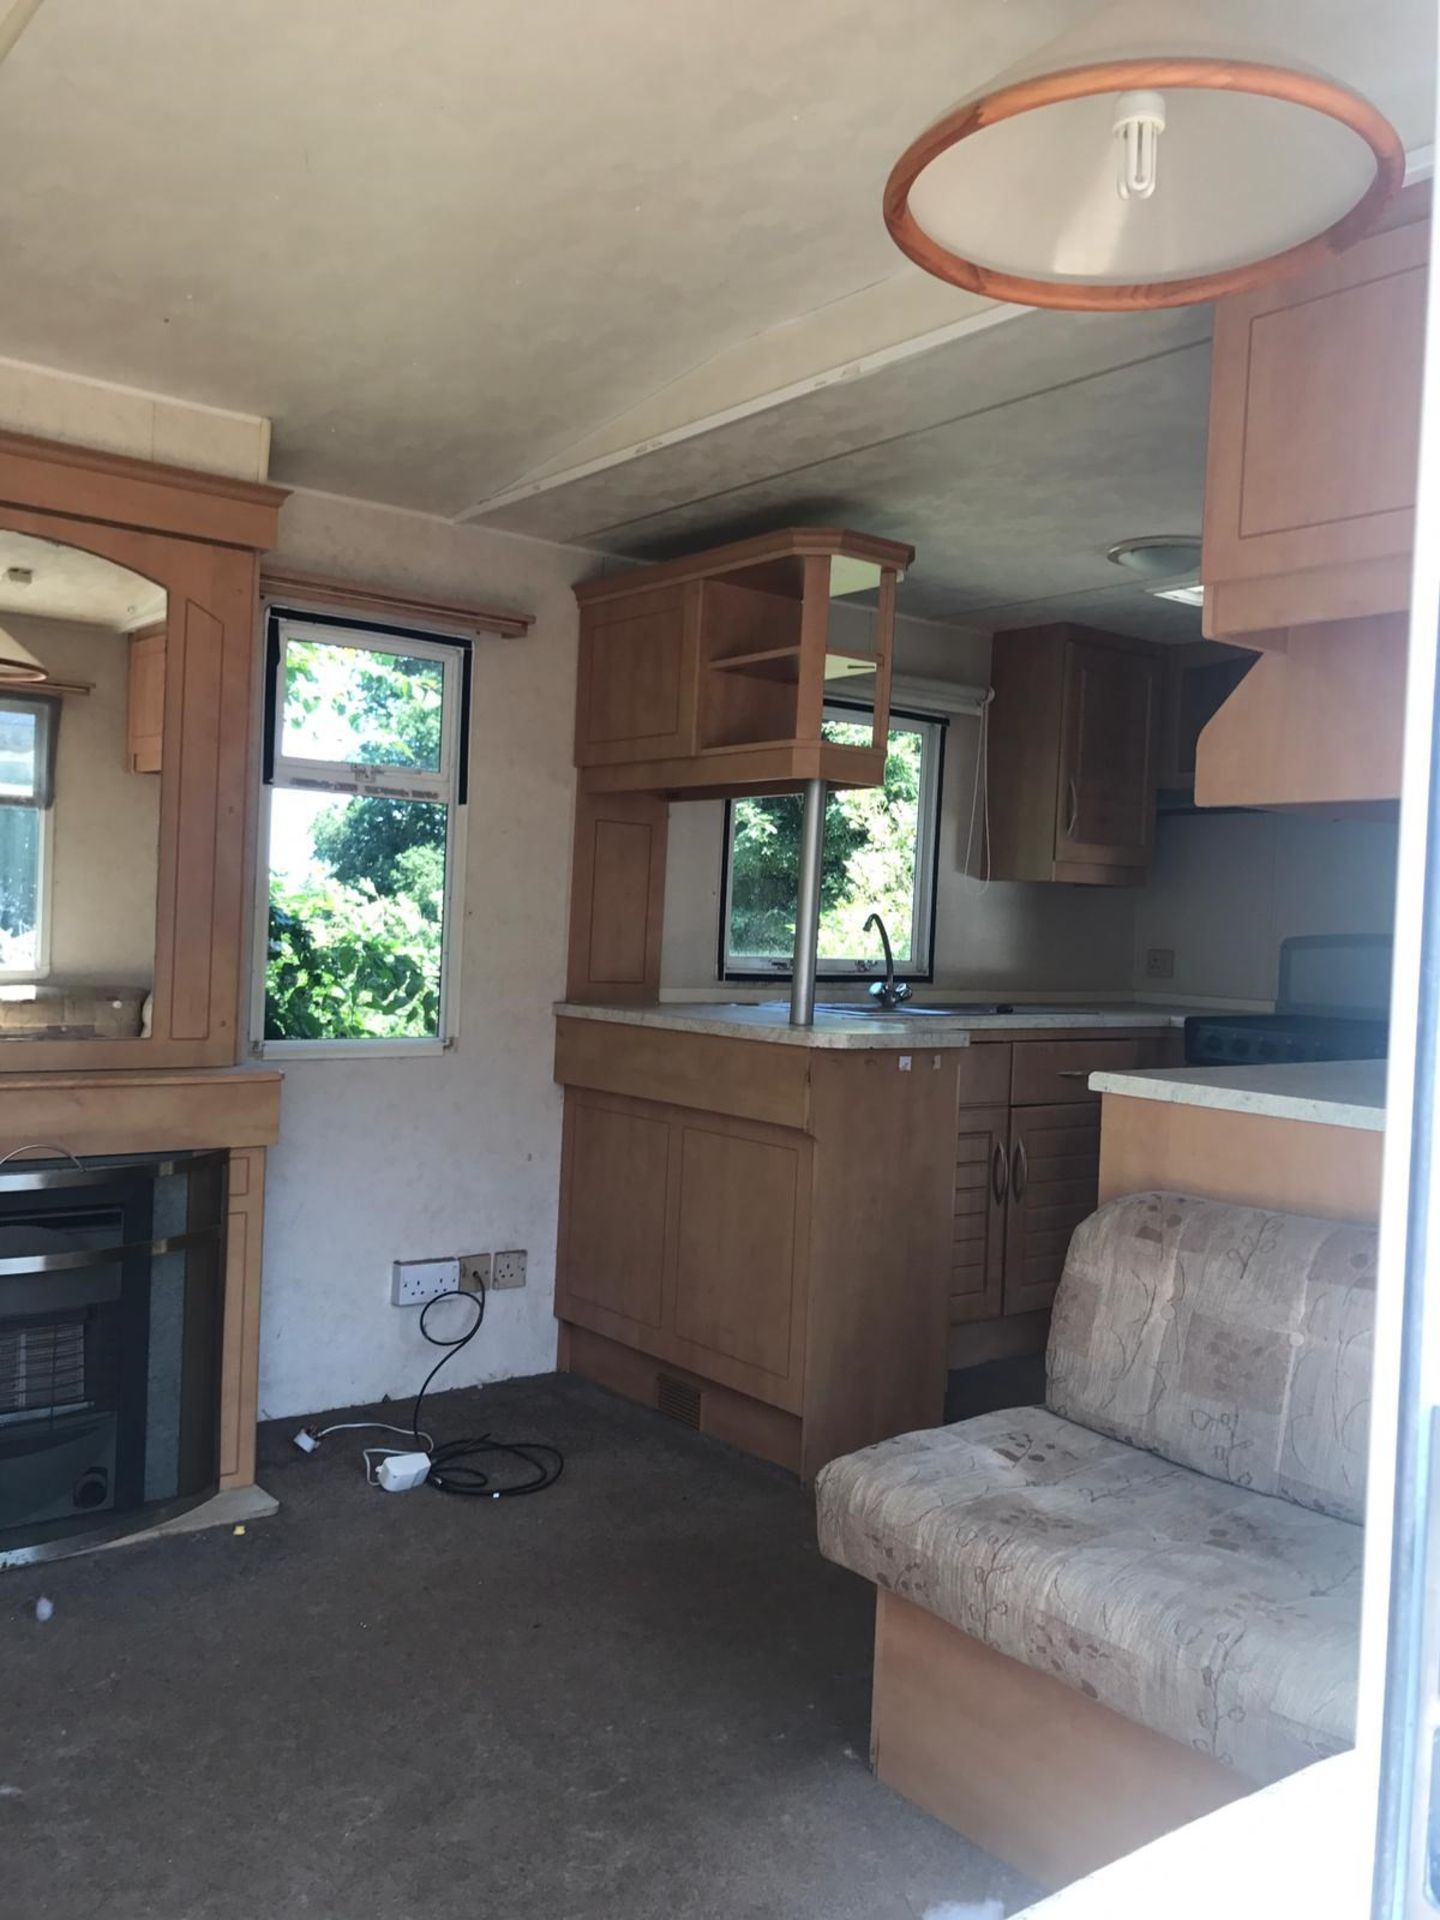 STATIC CARAVAN / MOBILE HOME - TO BE REMOVED WITHIN 7 DAYS, NO RESERVE! *NO VAT* - Image 14 of 18